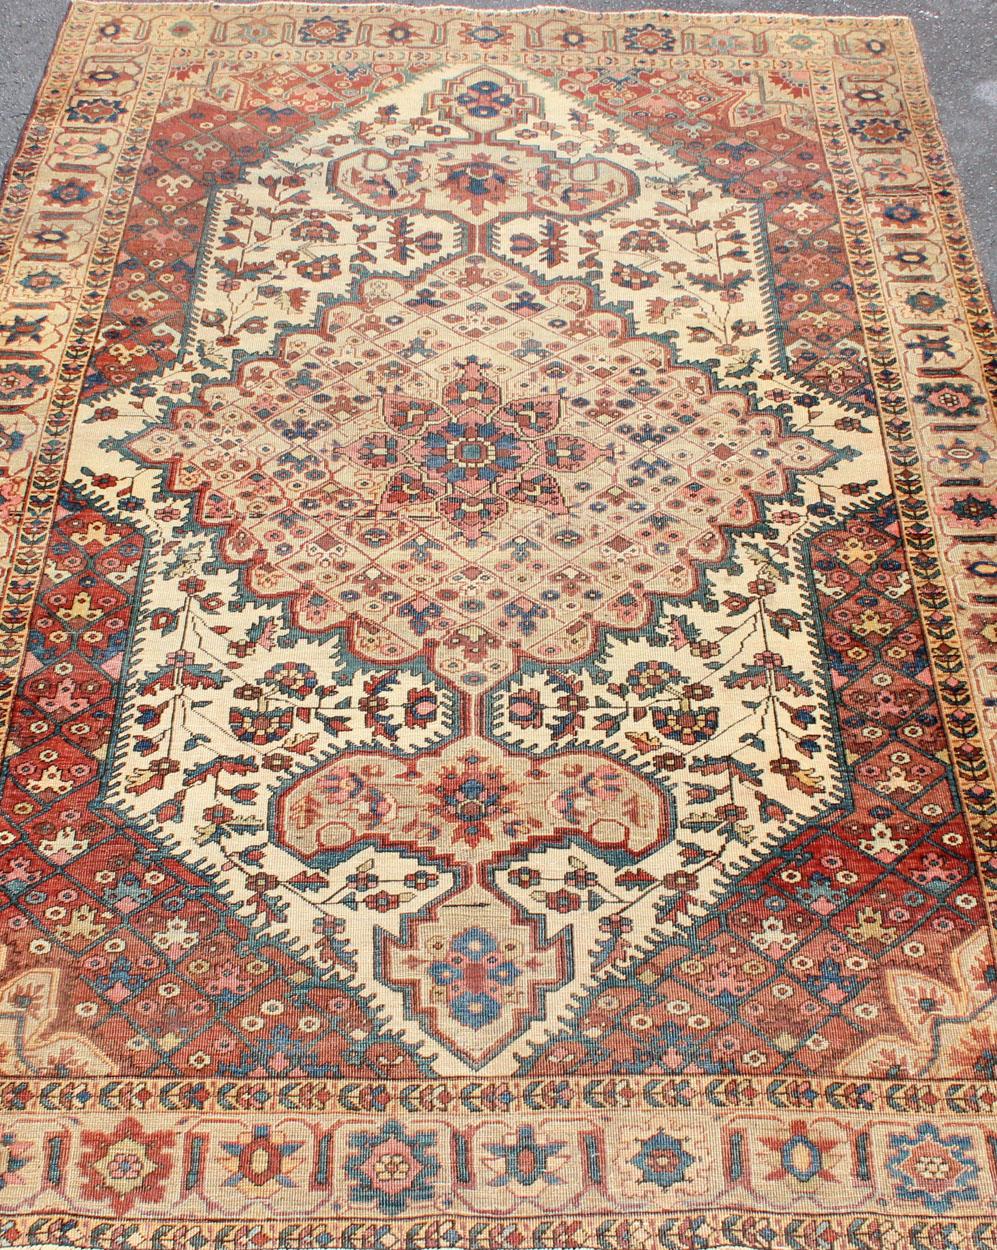 Antique Feraghan Sarouk Rug in Ivory Background, Brown Red, Camel, and Teal In Good Condition For Sale In Atlanta, GA